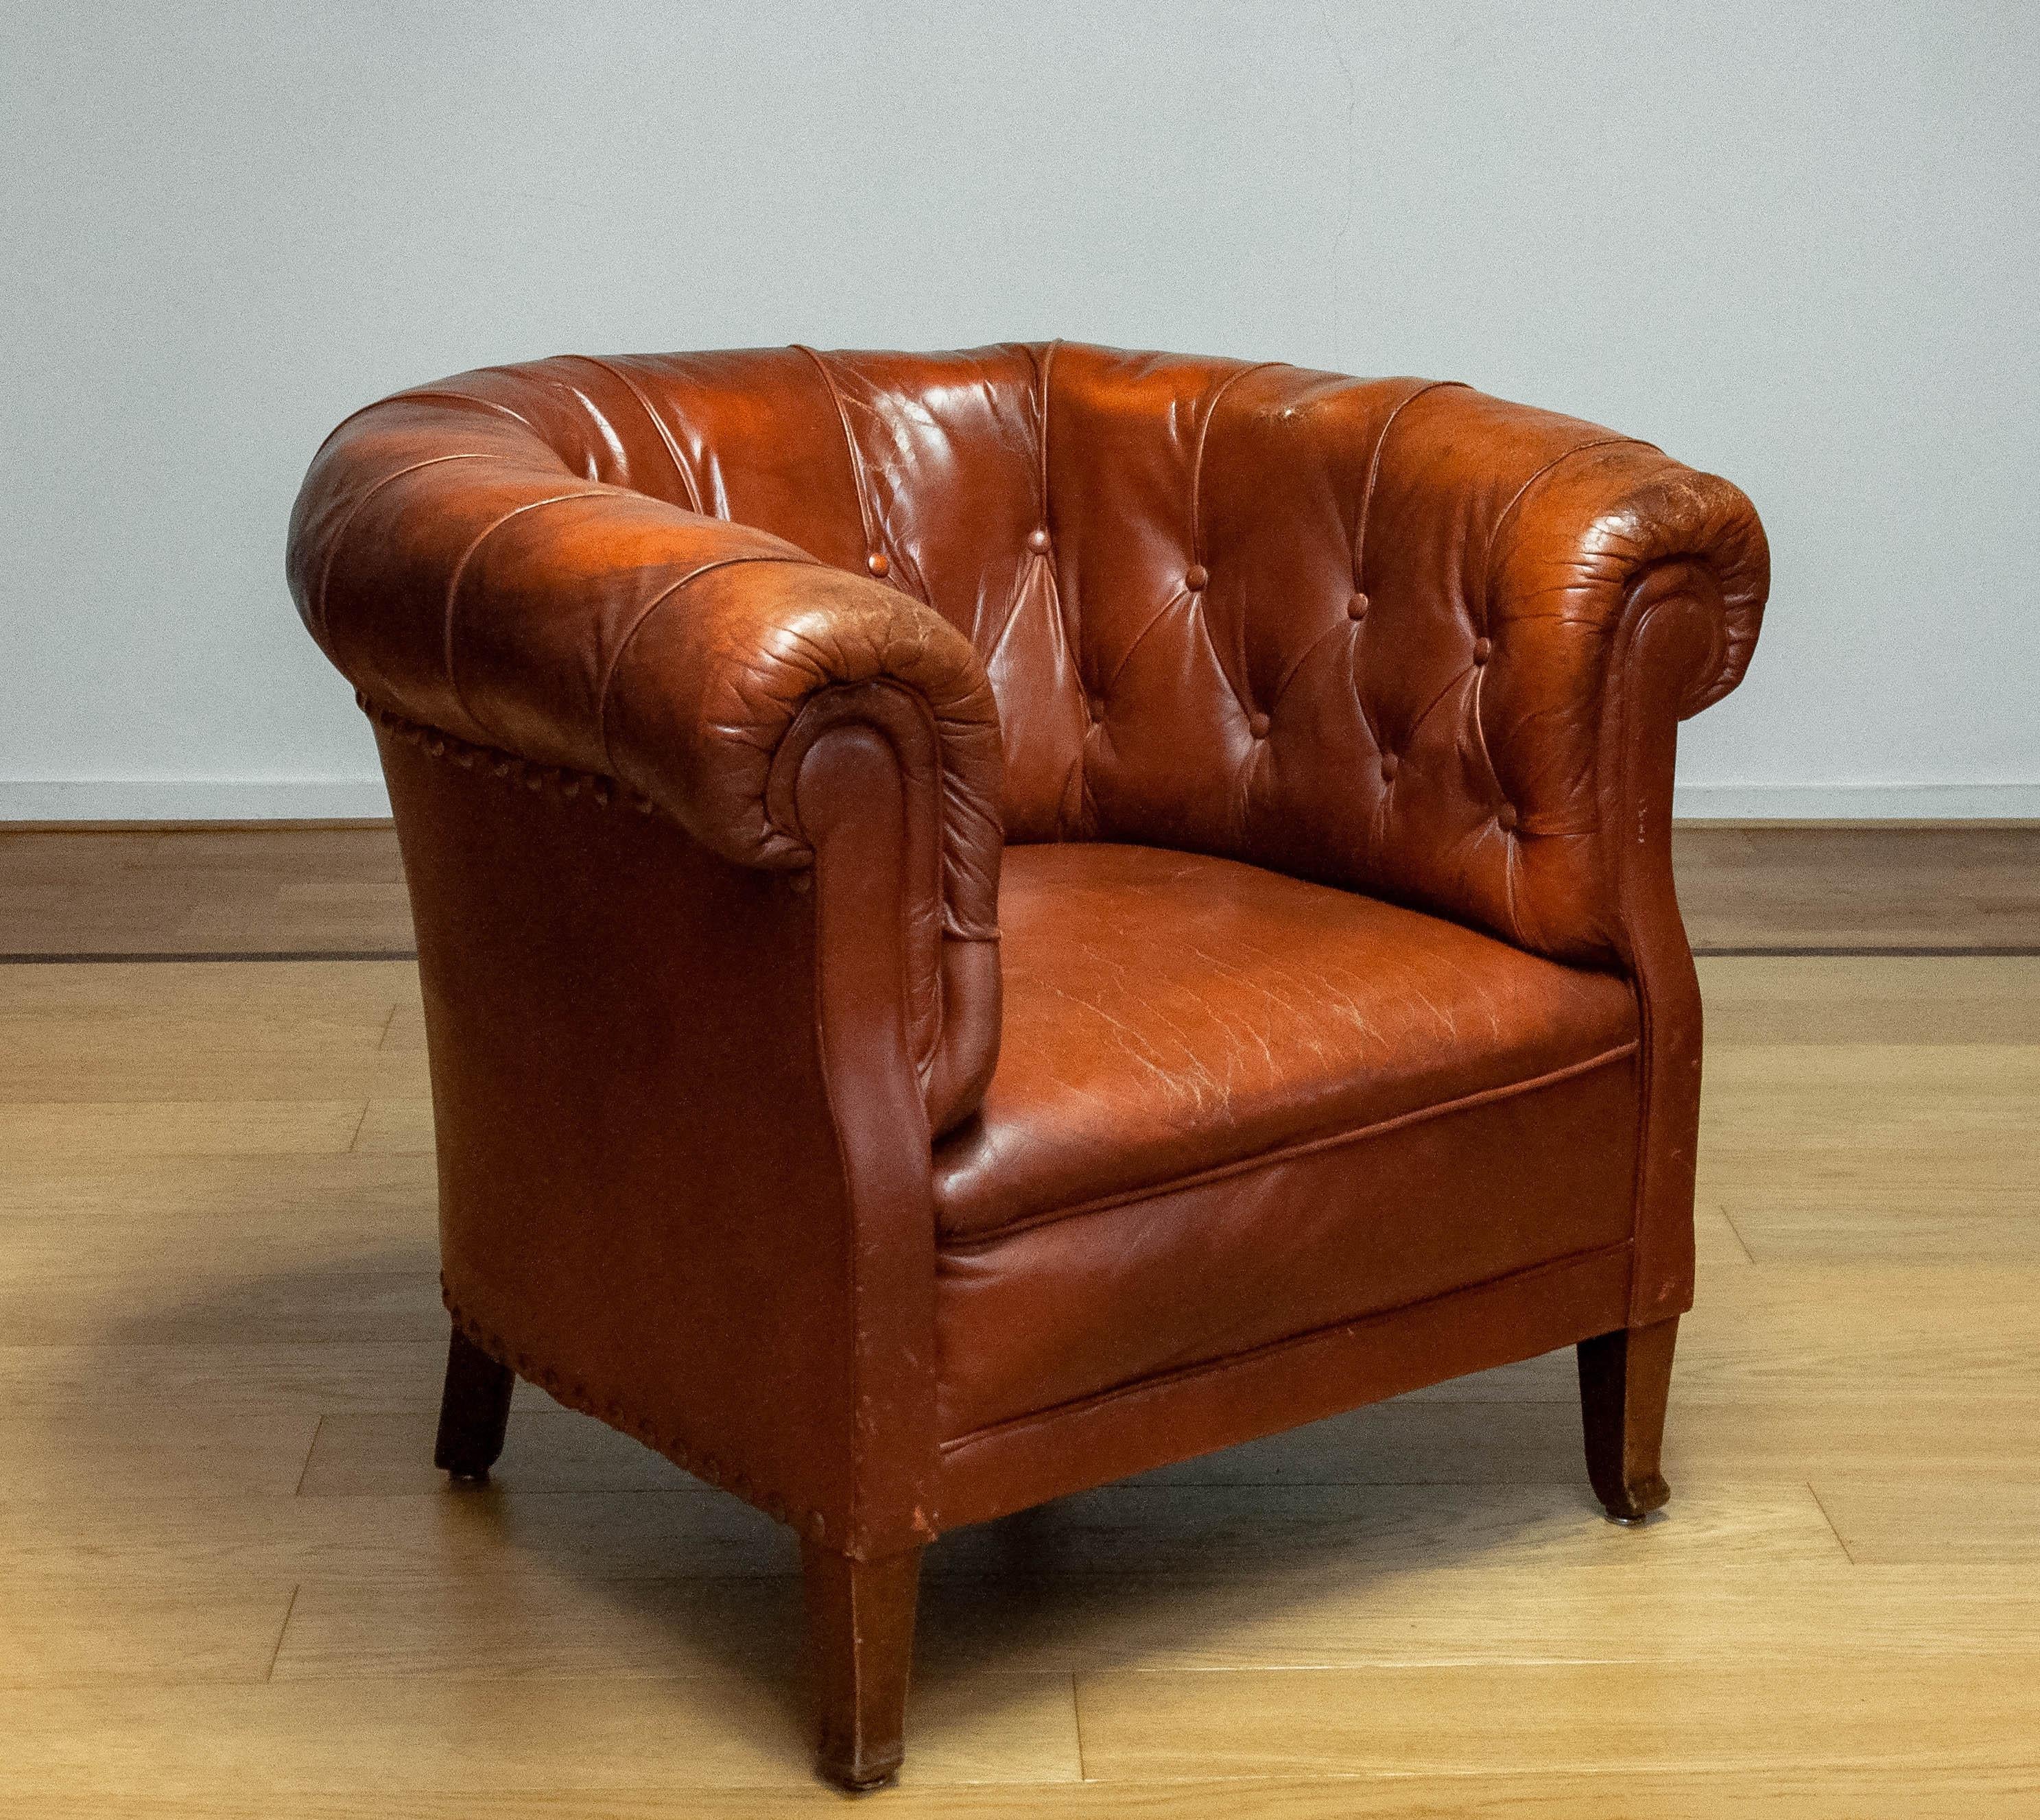 1940s Swedish Tufted Club Chair 'Chesterfield Model' In Tan Brown Worn Leather 2